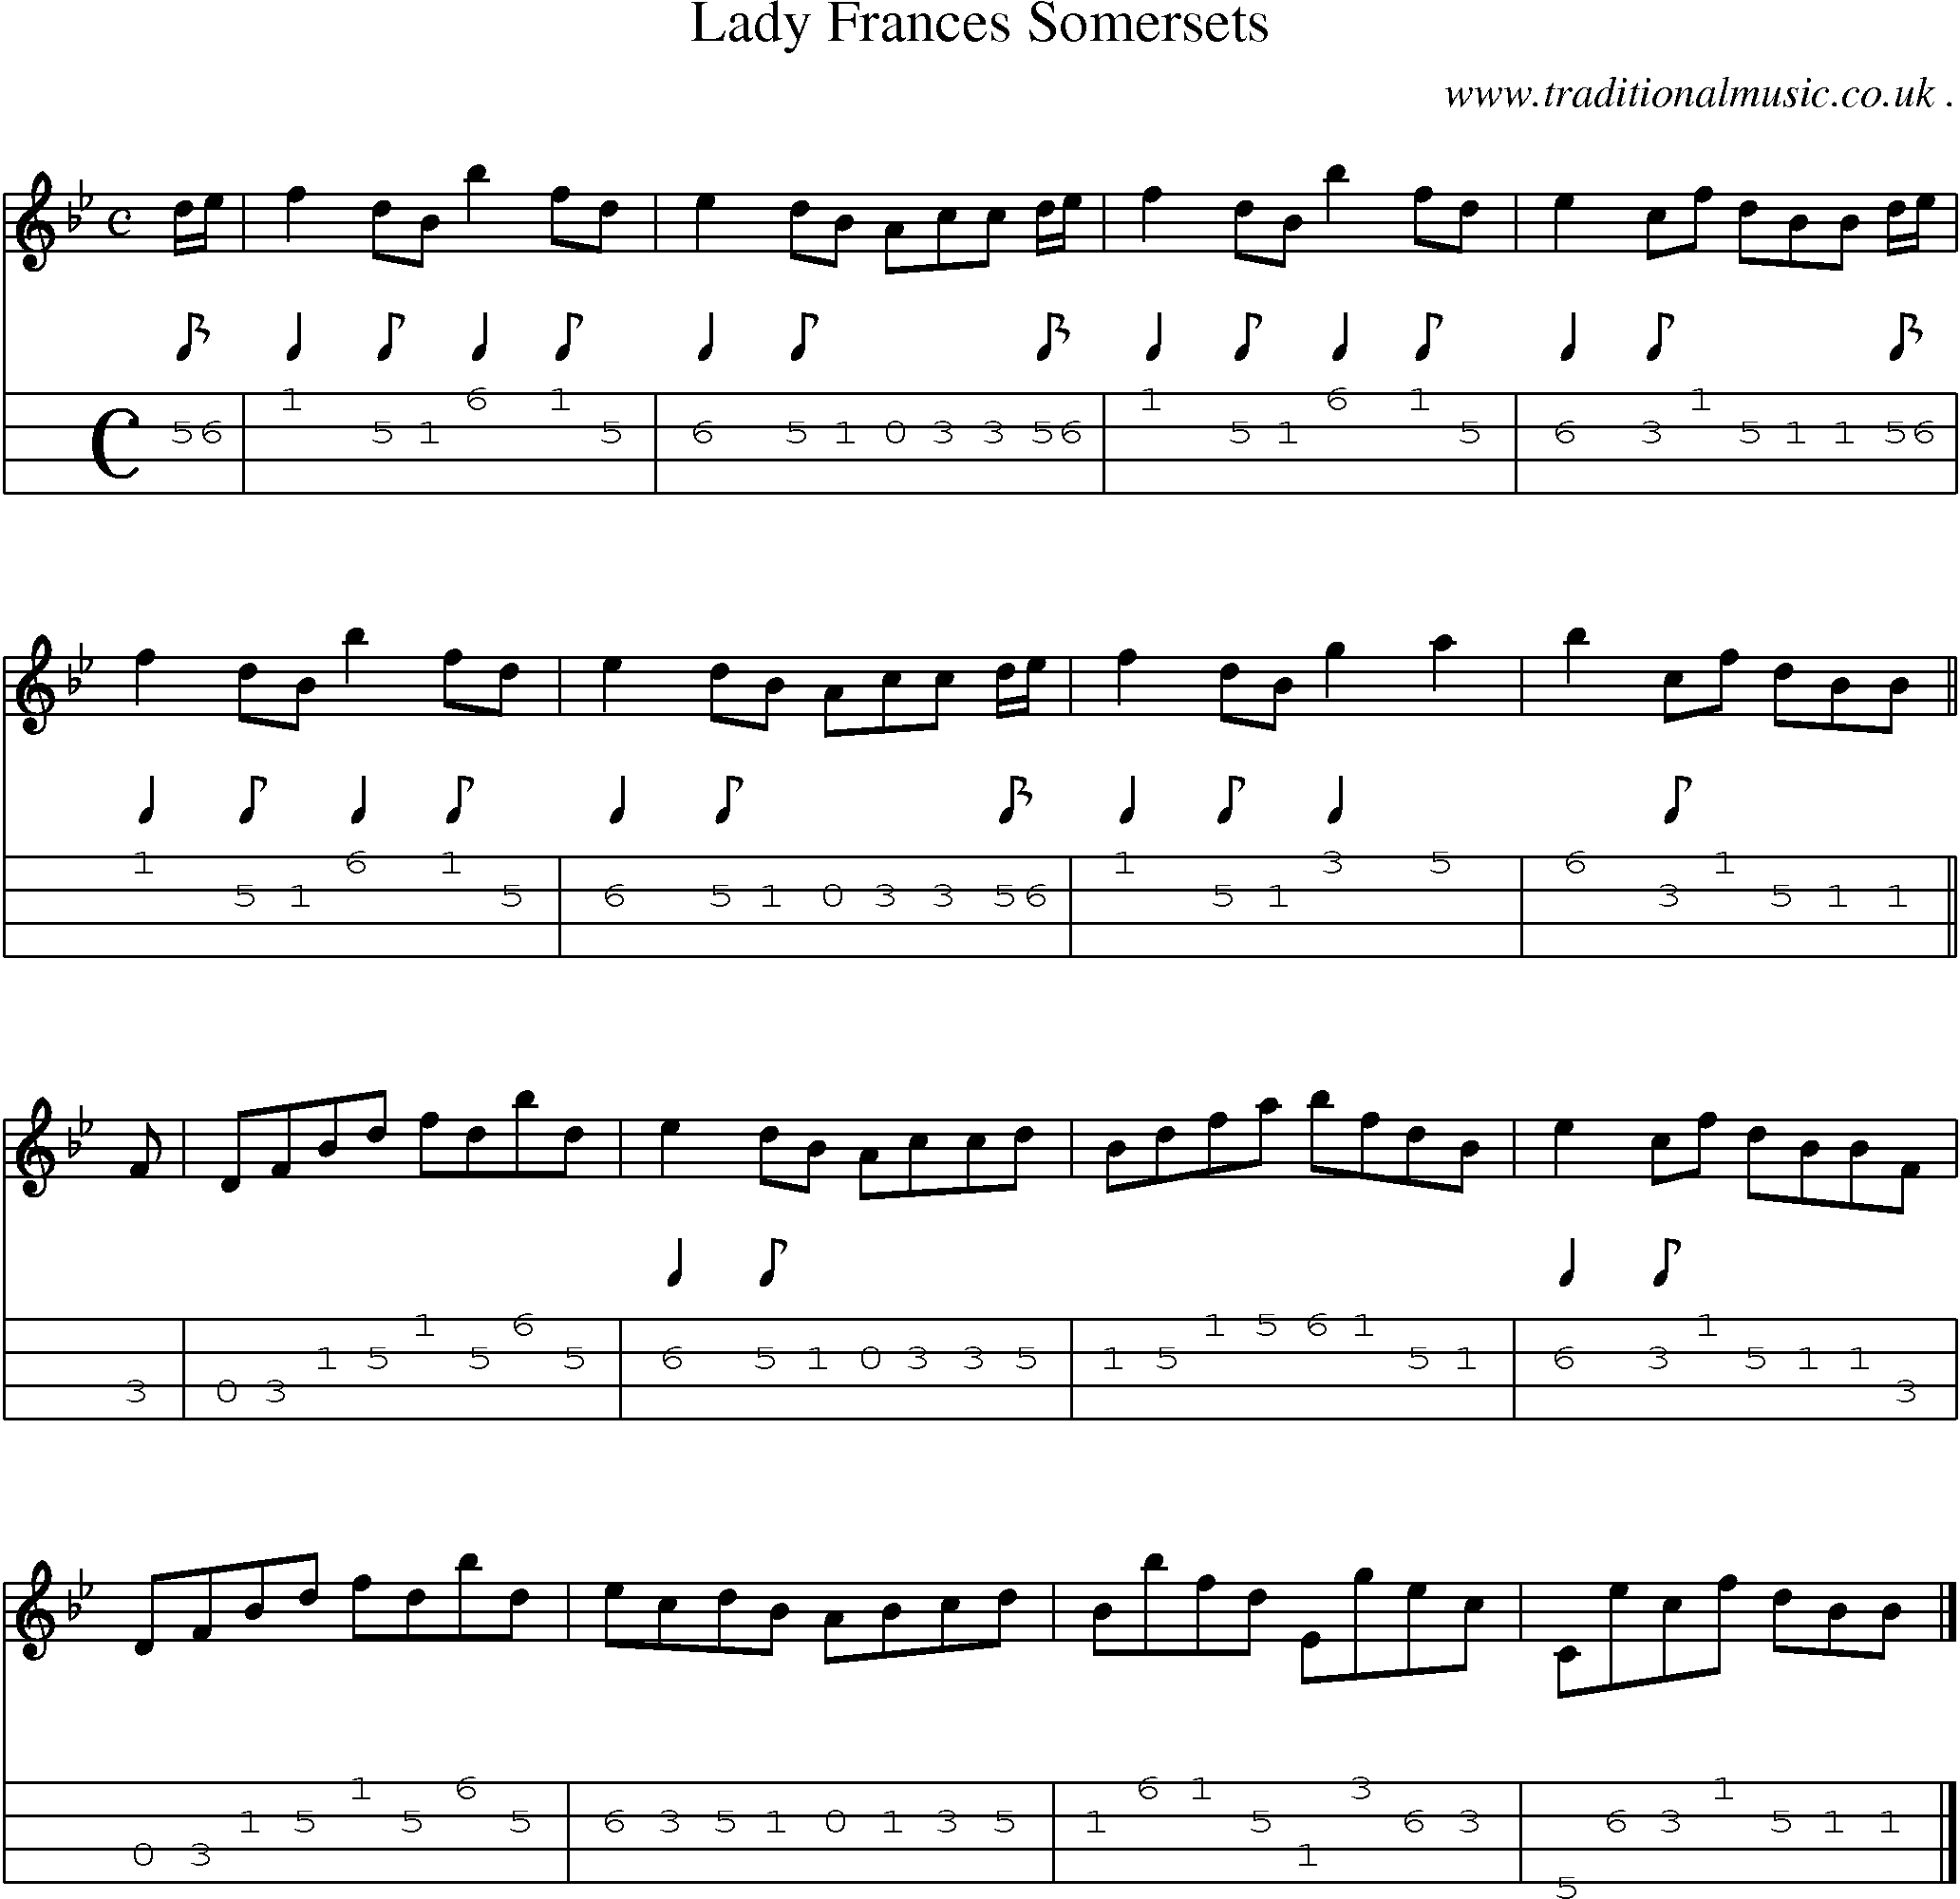 Sheet-music  score, Chords and Mandolin Tabs for Lady Frances Somersets